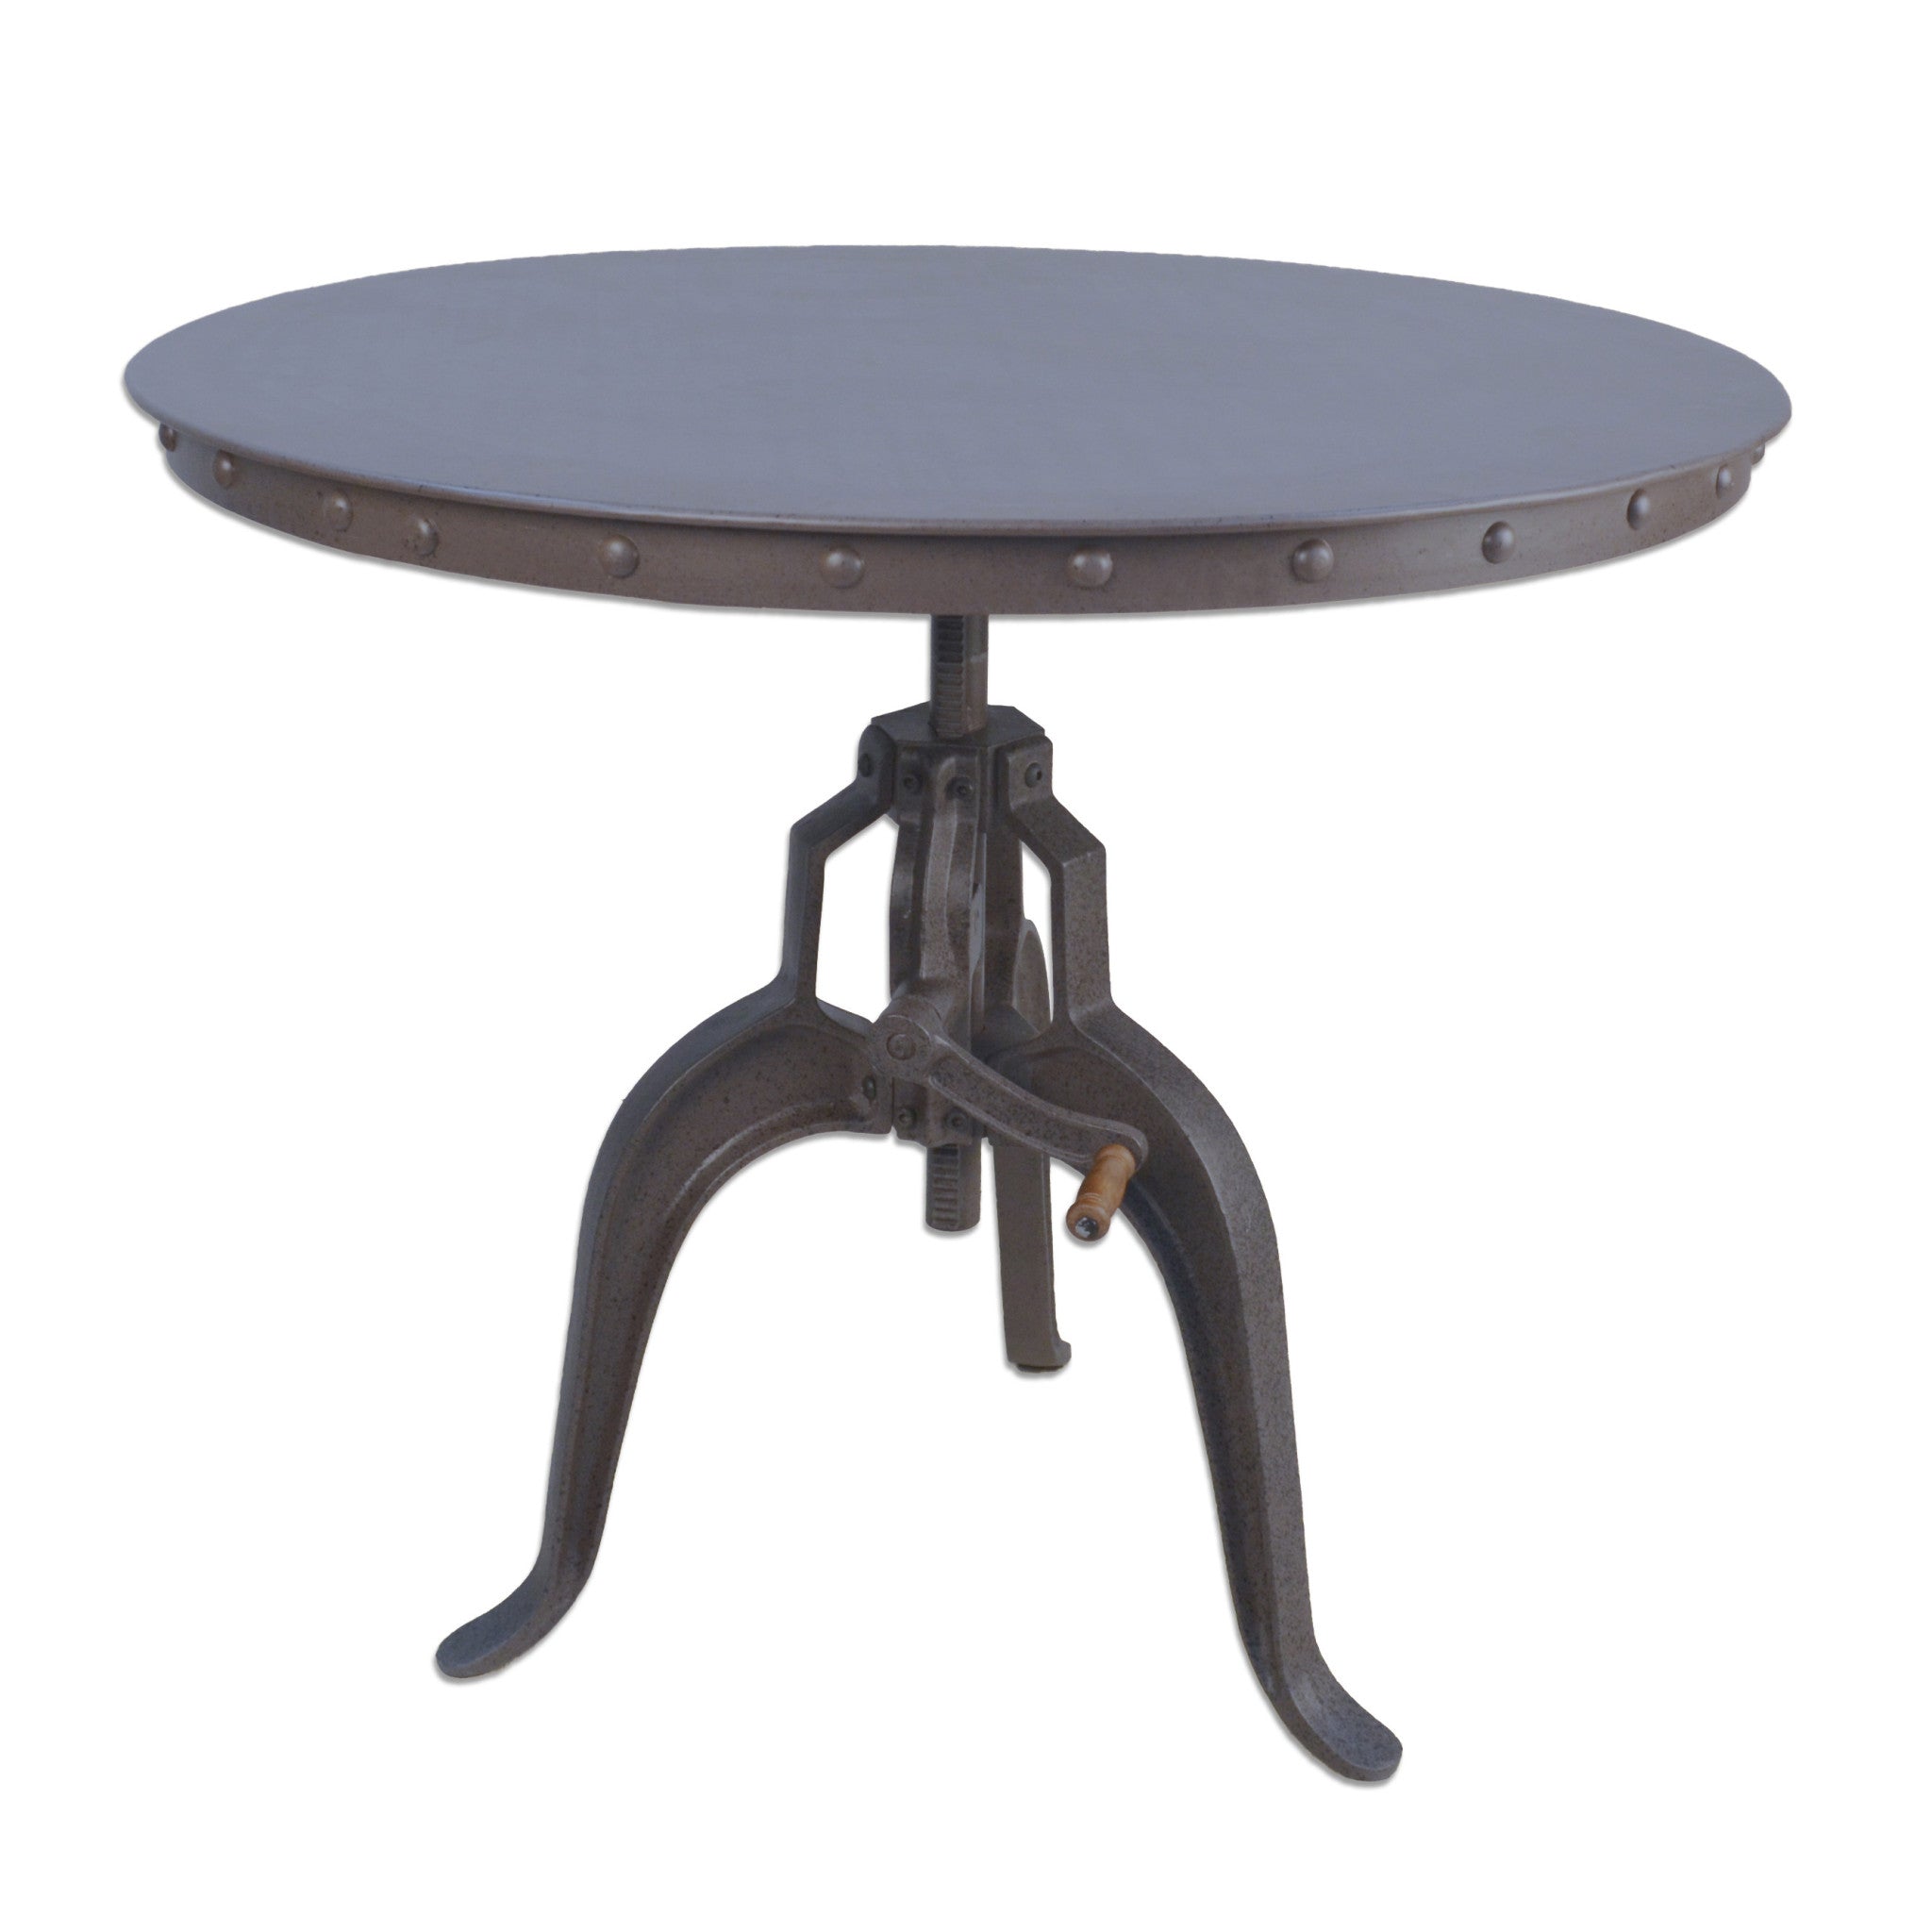 36" Industrial Gray Adjustable Crank Round Top Dining Table.